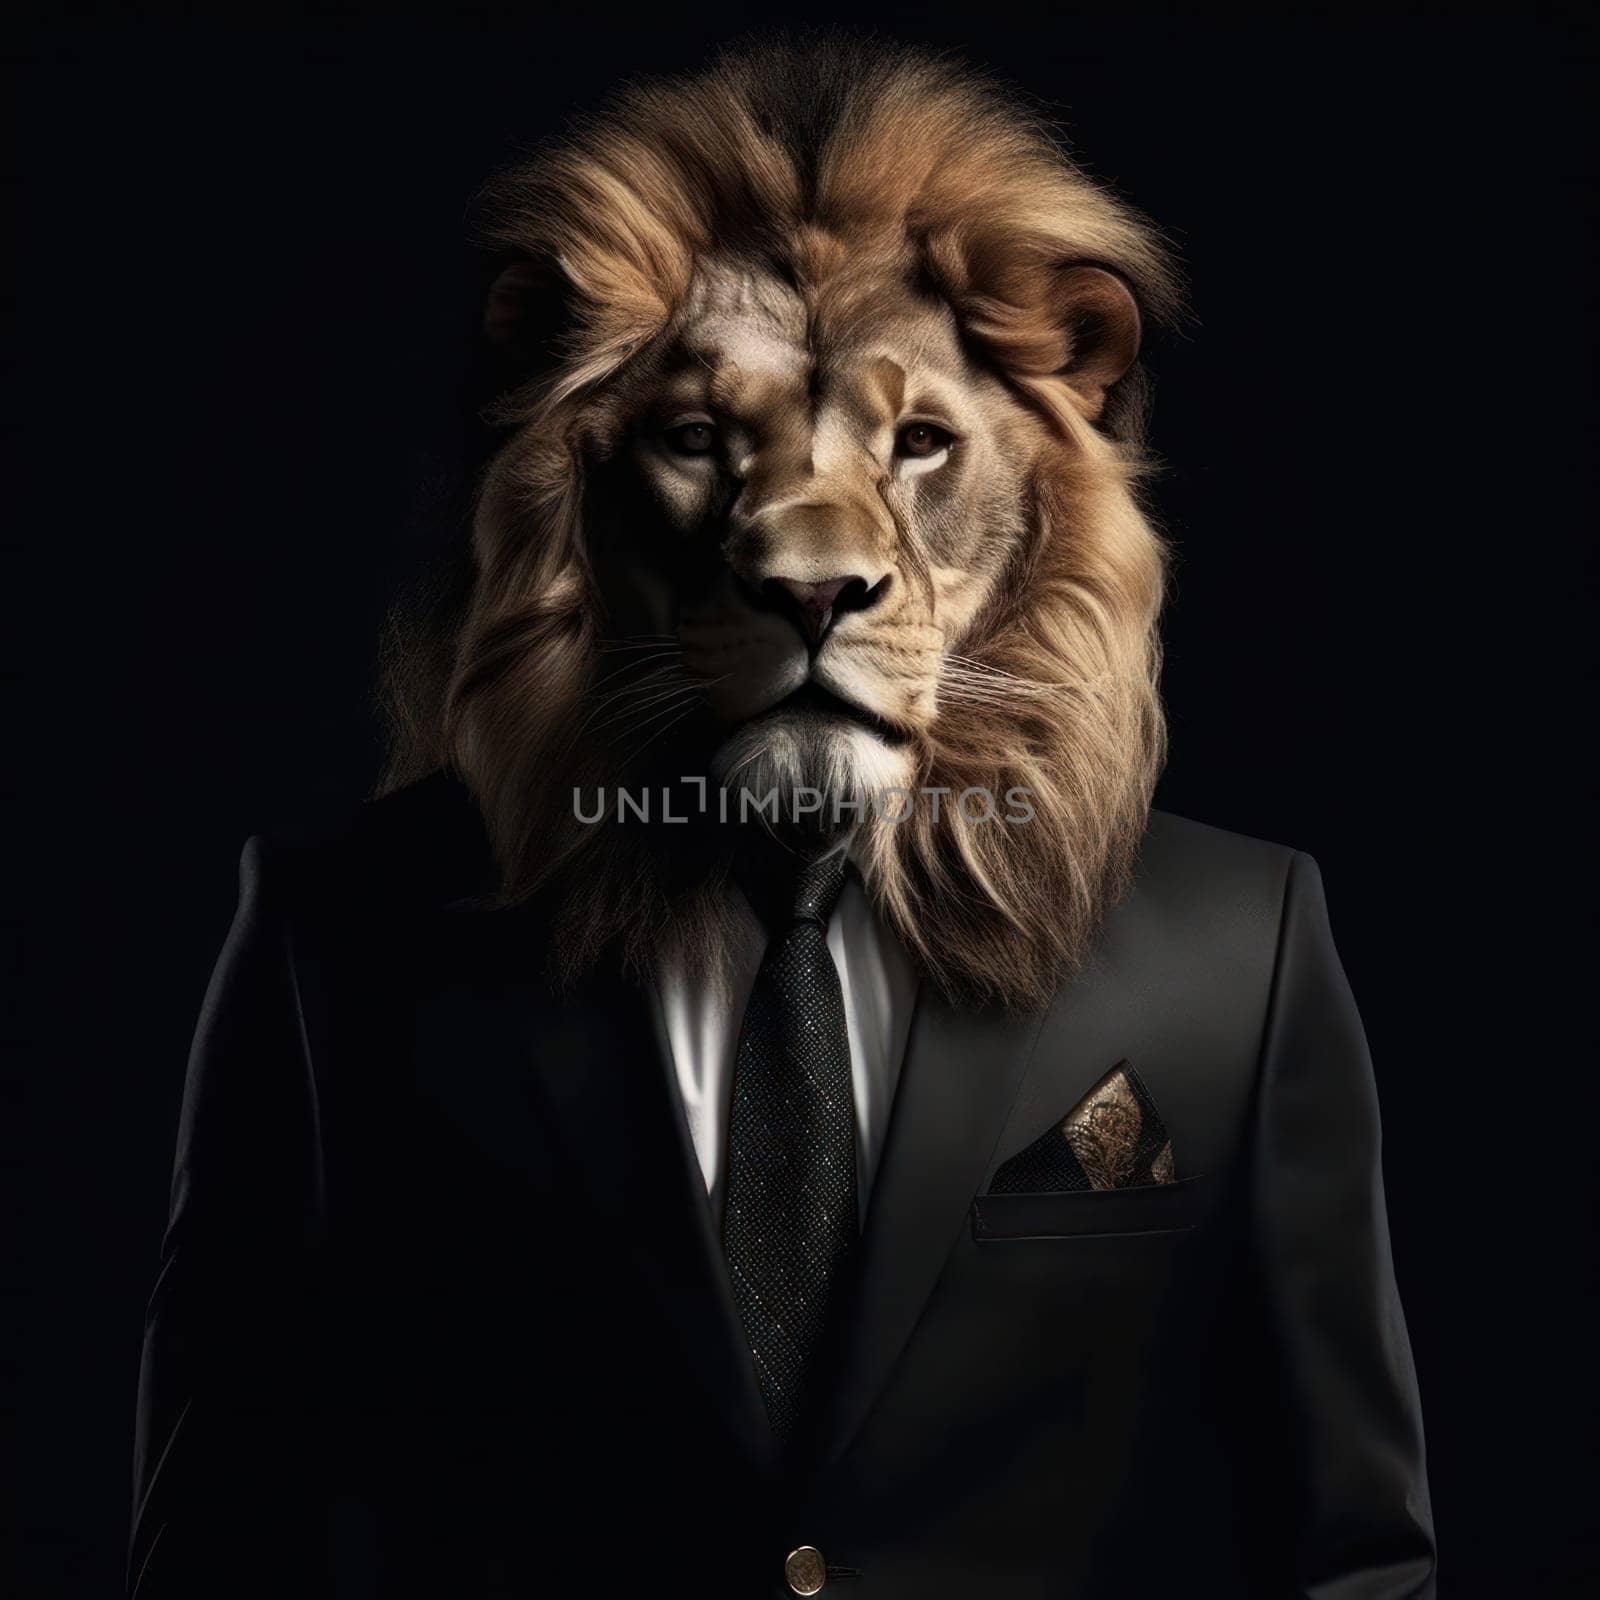 A whimsical and artistic lion in formal attire with a surreal twist by Sorapop